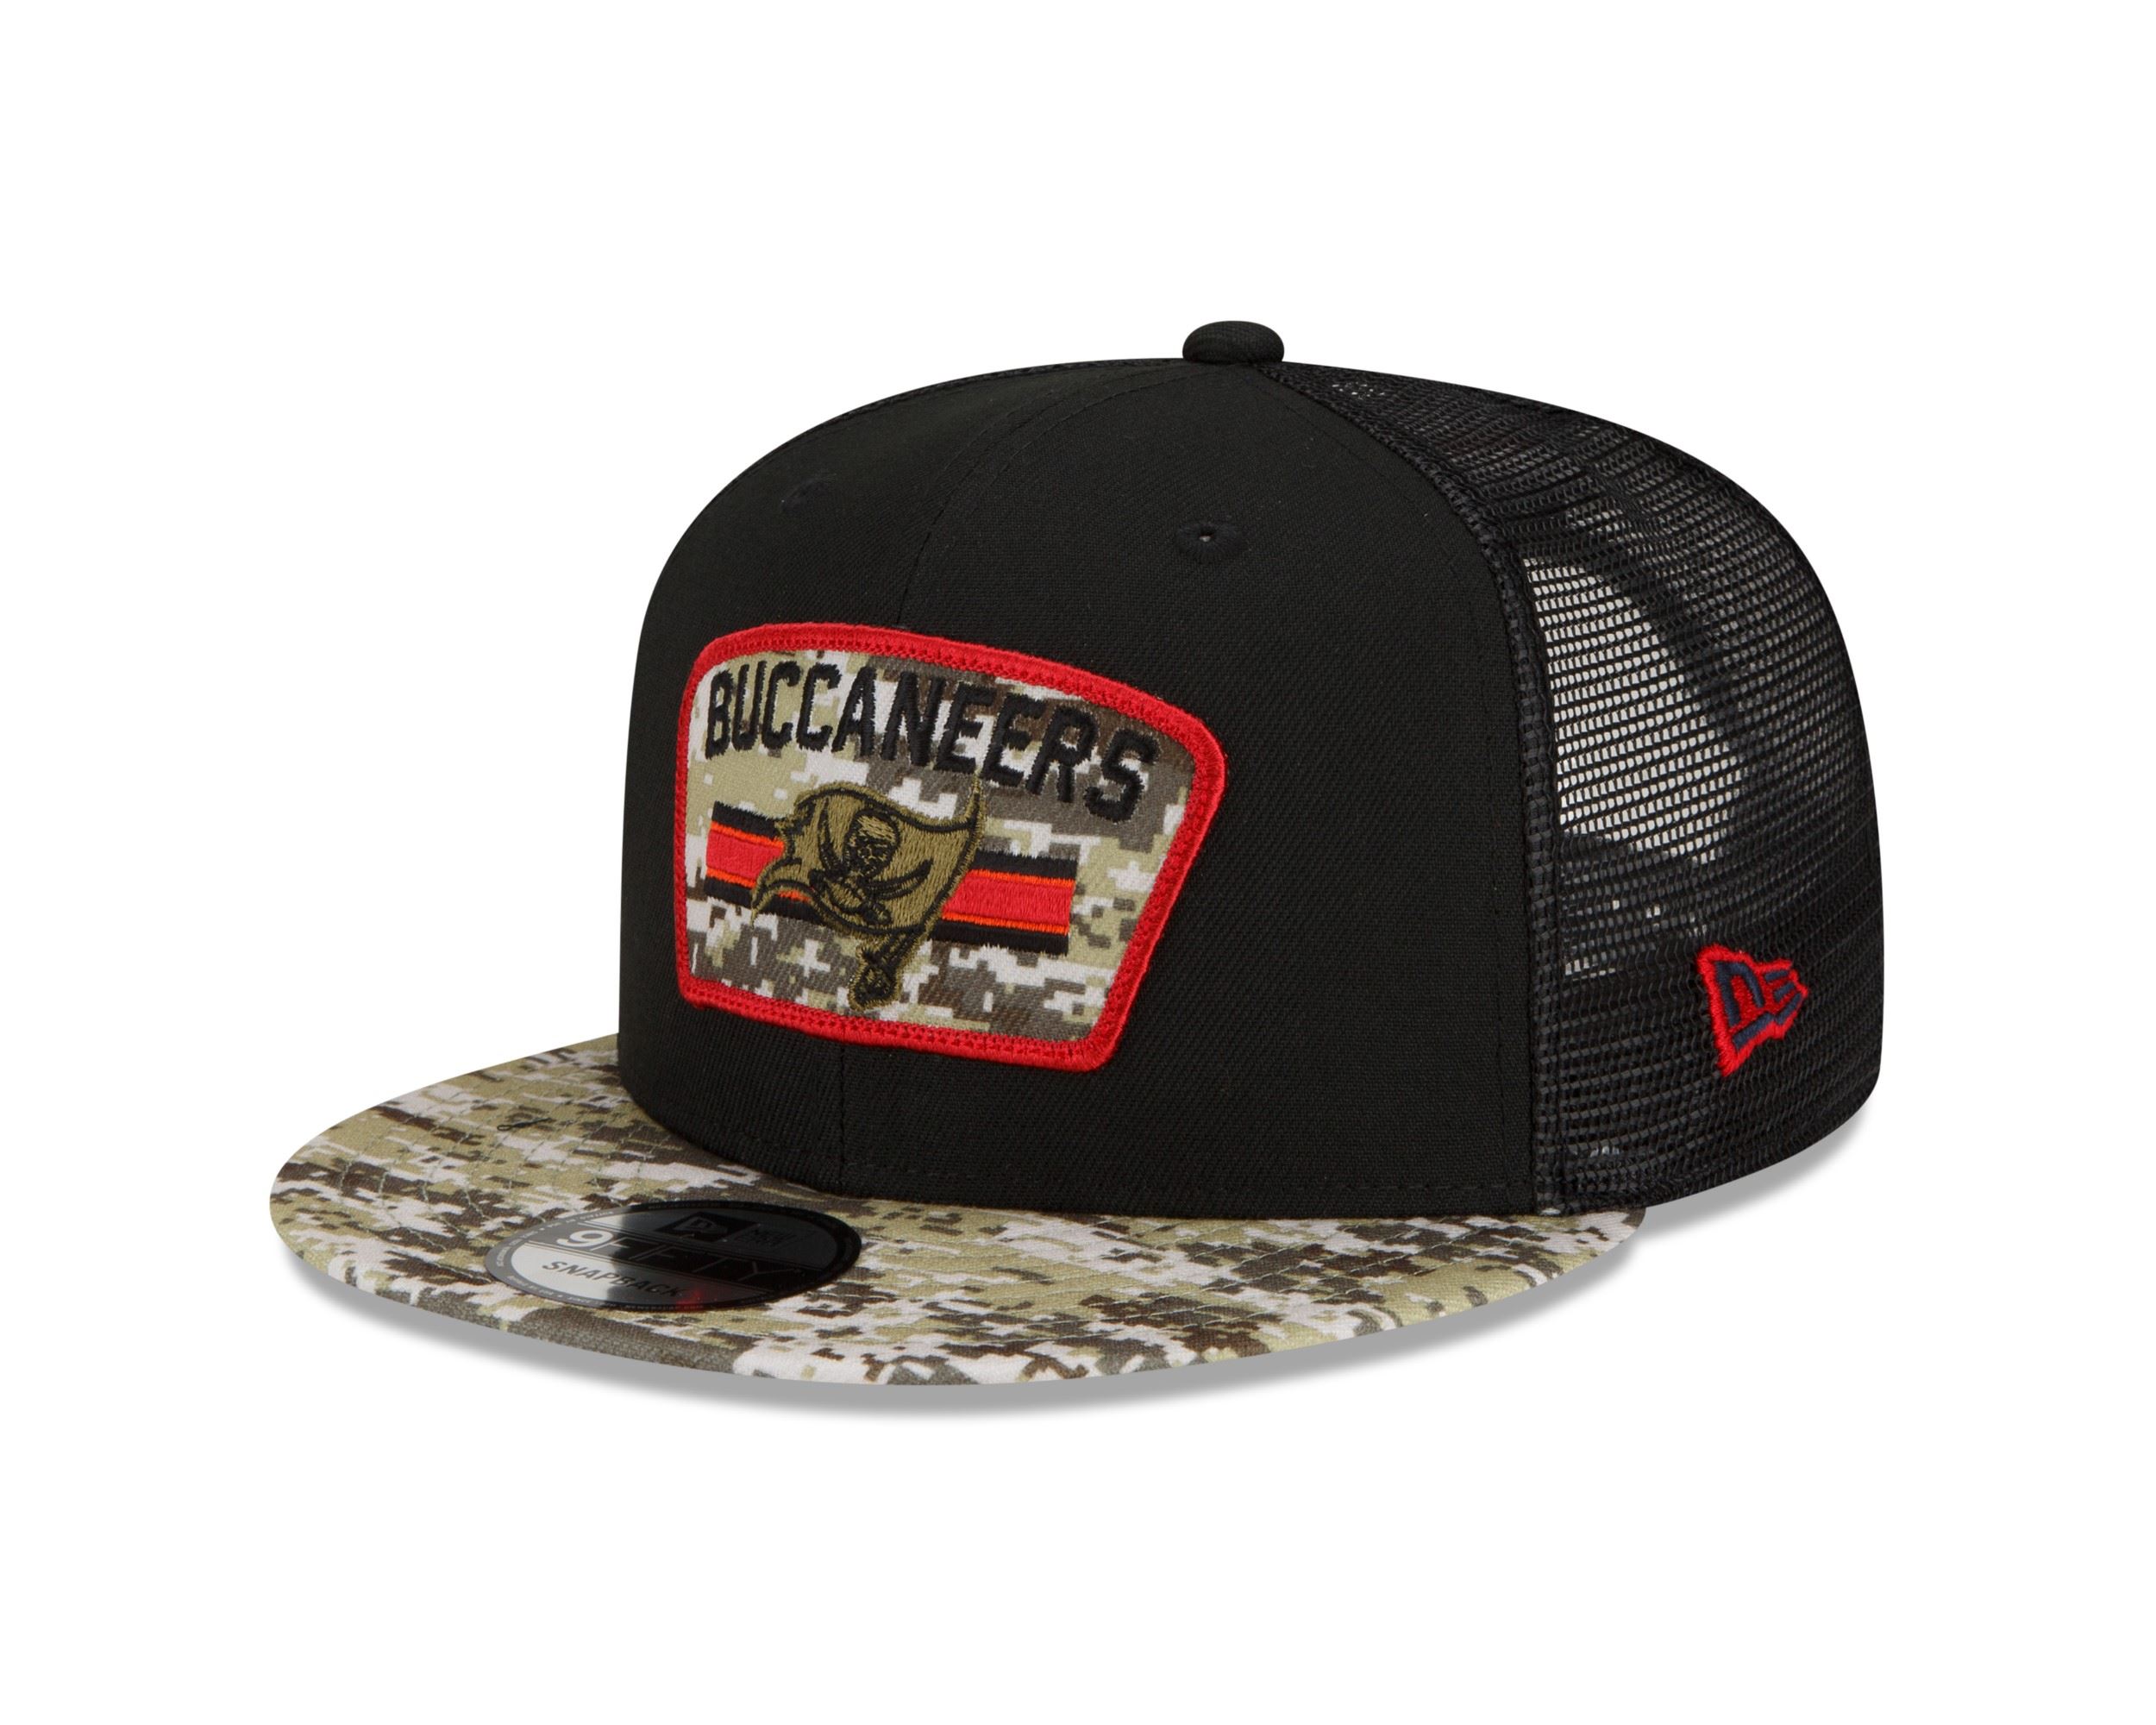 Tampa Bay Buccaneers NFL On Field 2021 Salute to Service Black 9Fifty Kids Snapback Cap New Era